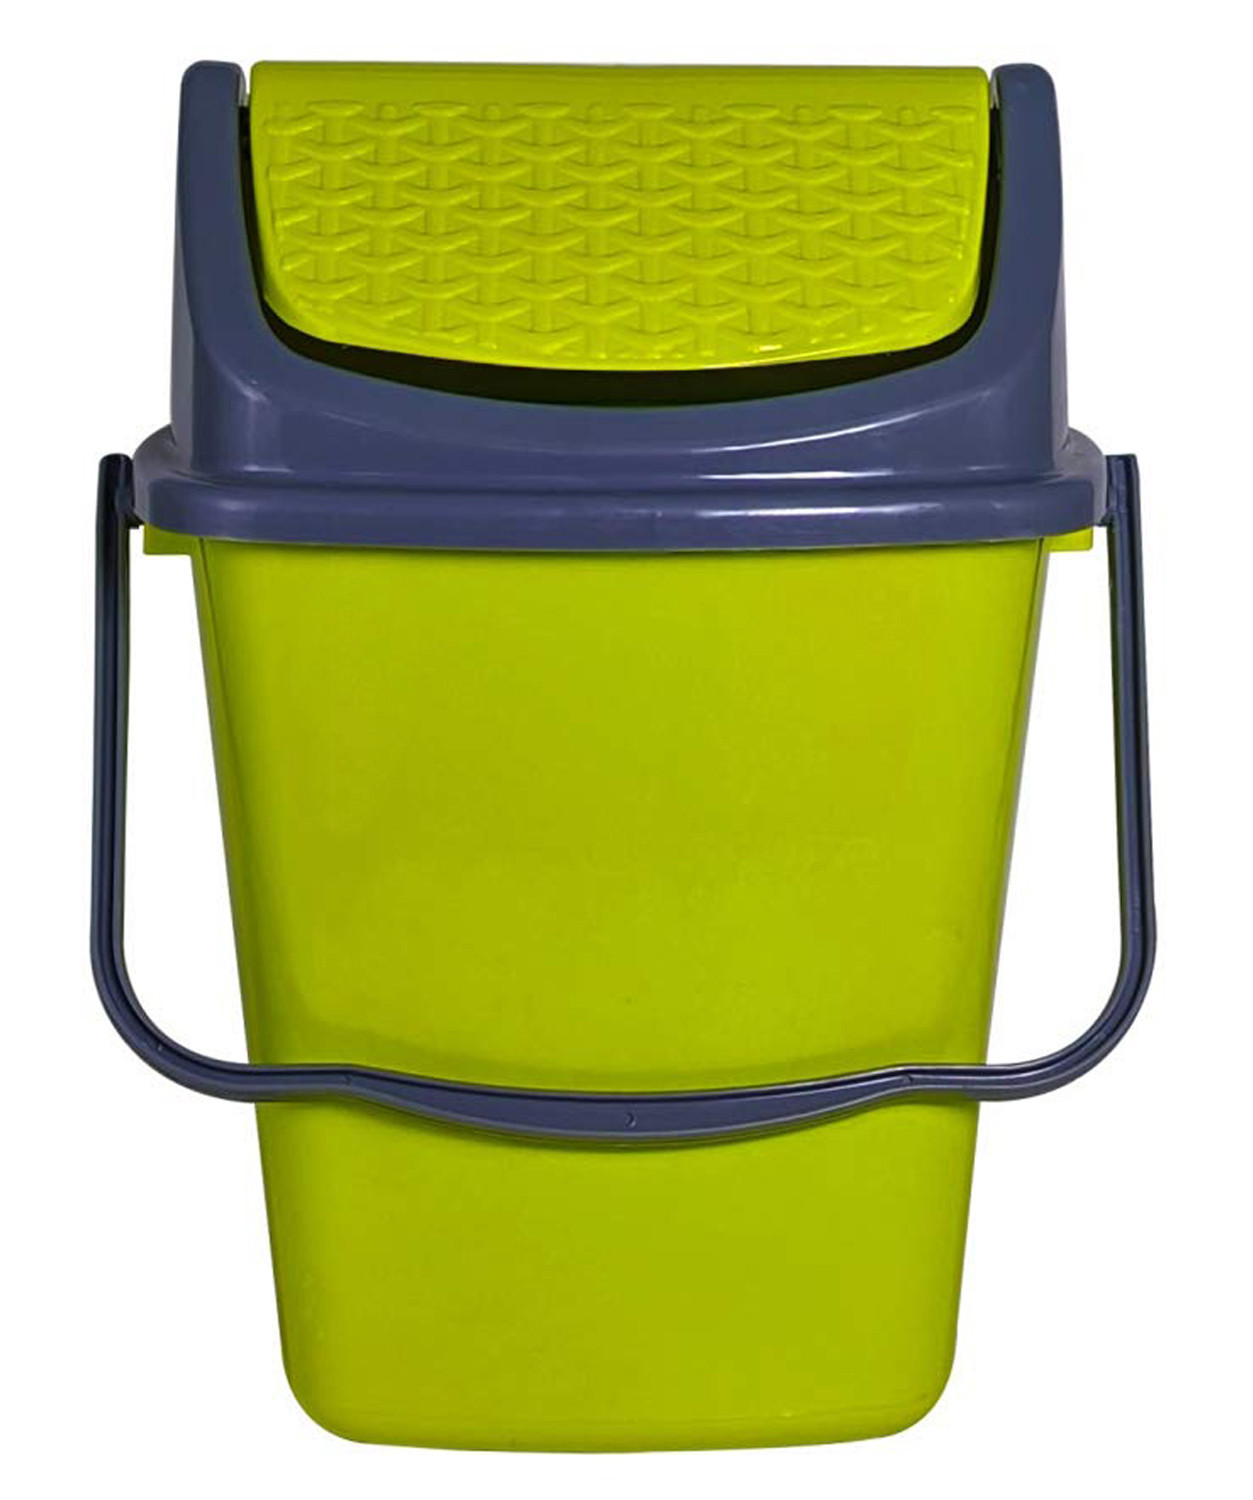 Kuber Industries 3 Pieces Delight Plastic Swing  Garbage Waste Dustbin for Home, Office with Handle, 5 Liters (Green & Brown & Yellow)